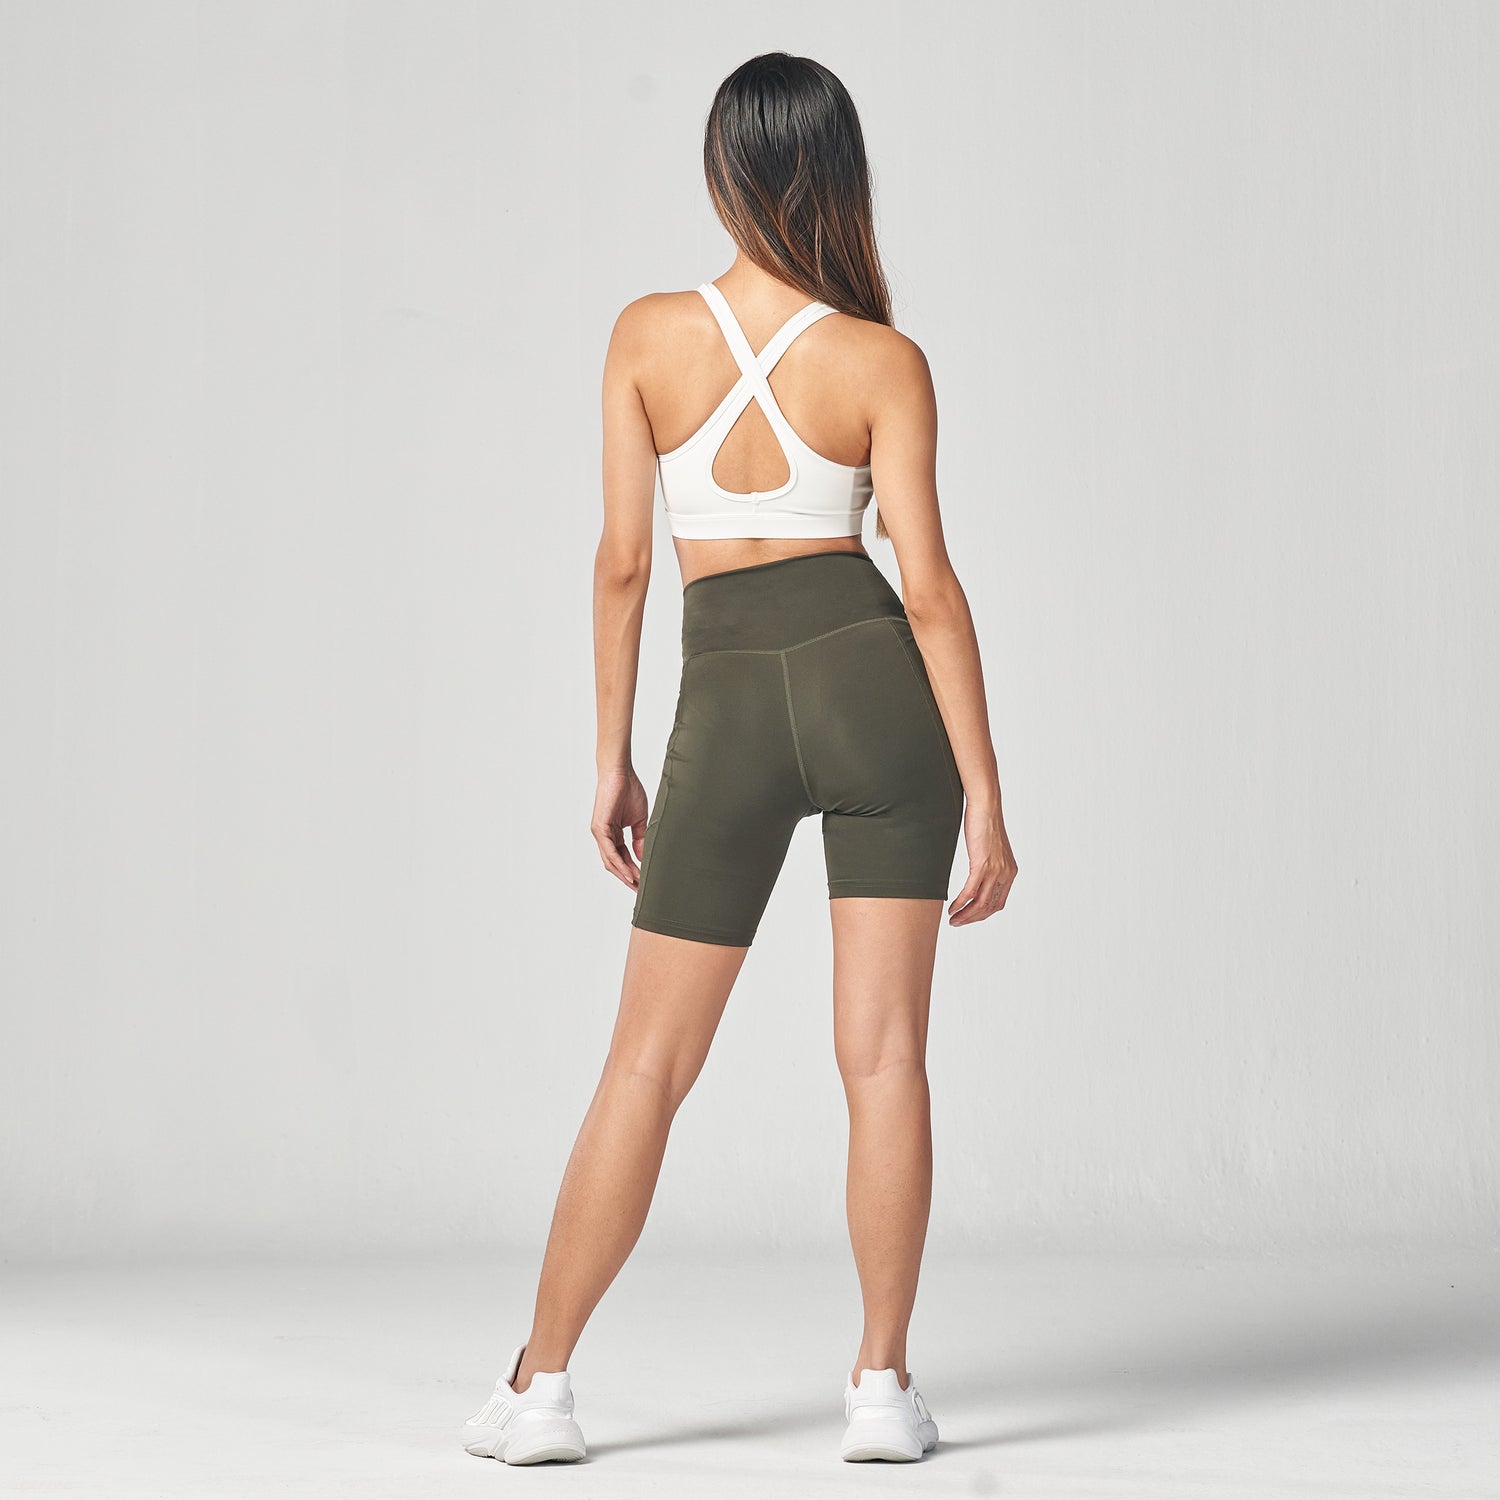 squatwolf-workout-clothes-essential-7-cycling-short-khaki-gym-shorts-for-women